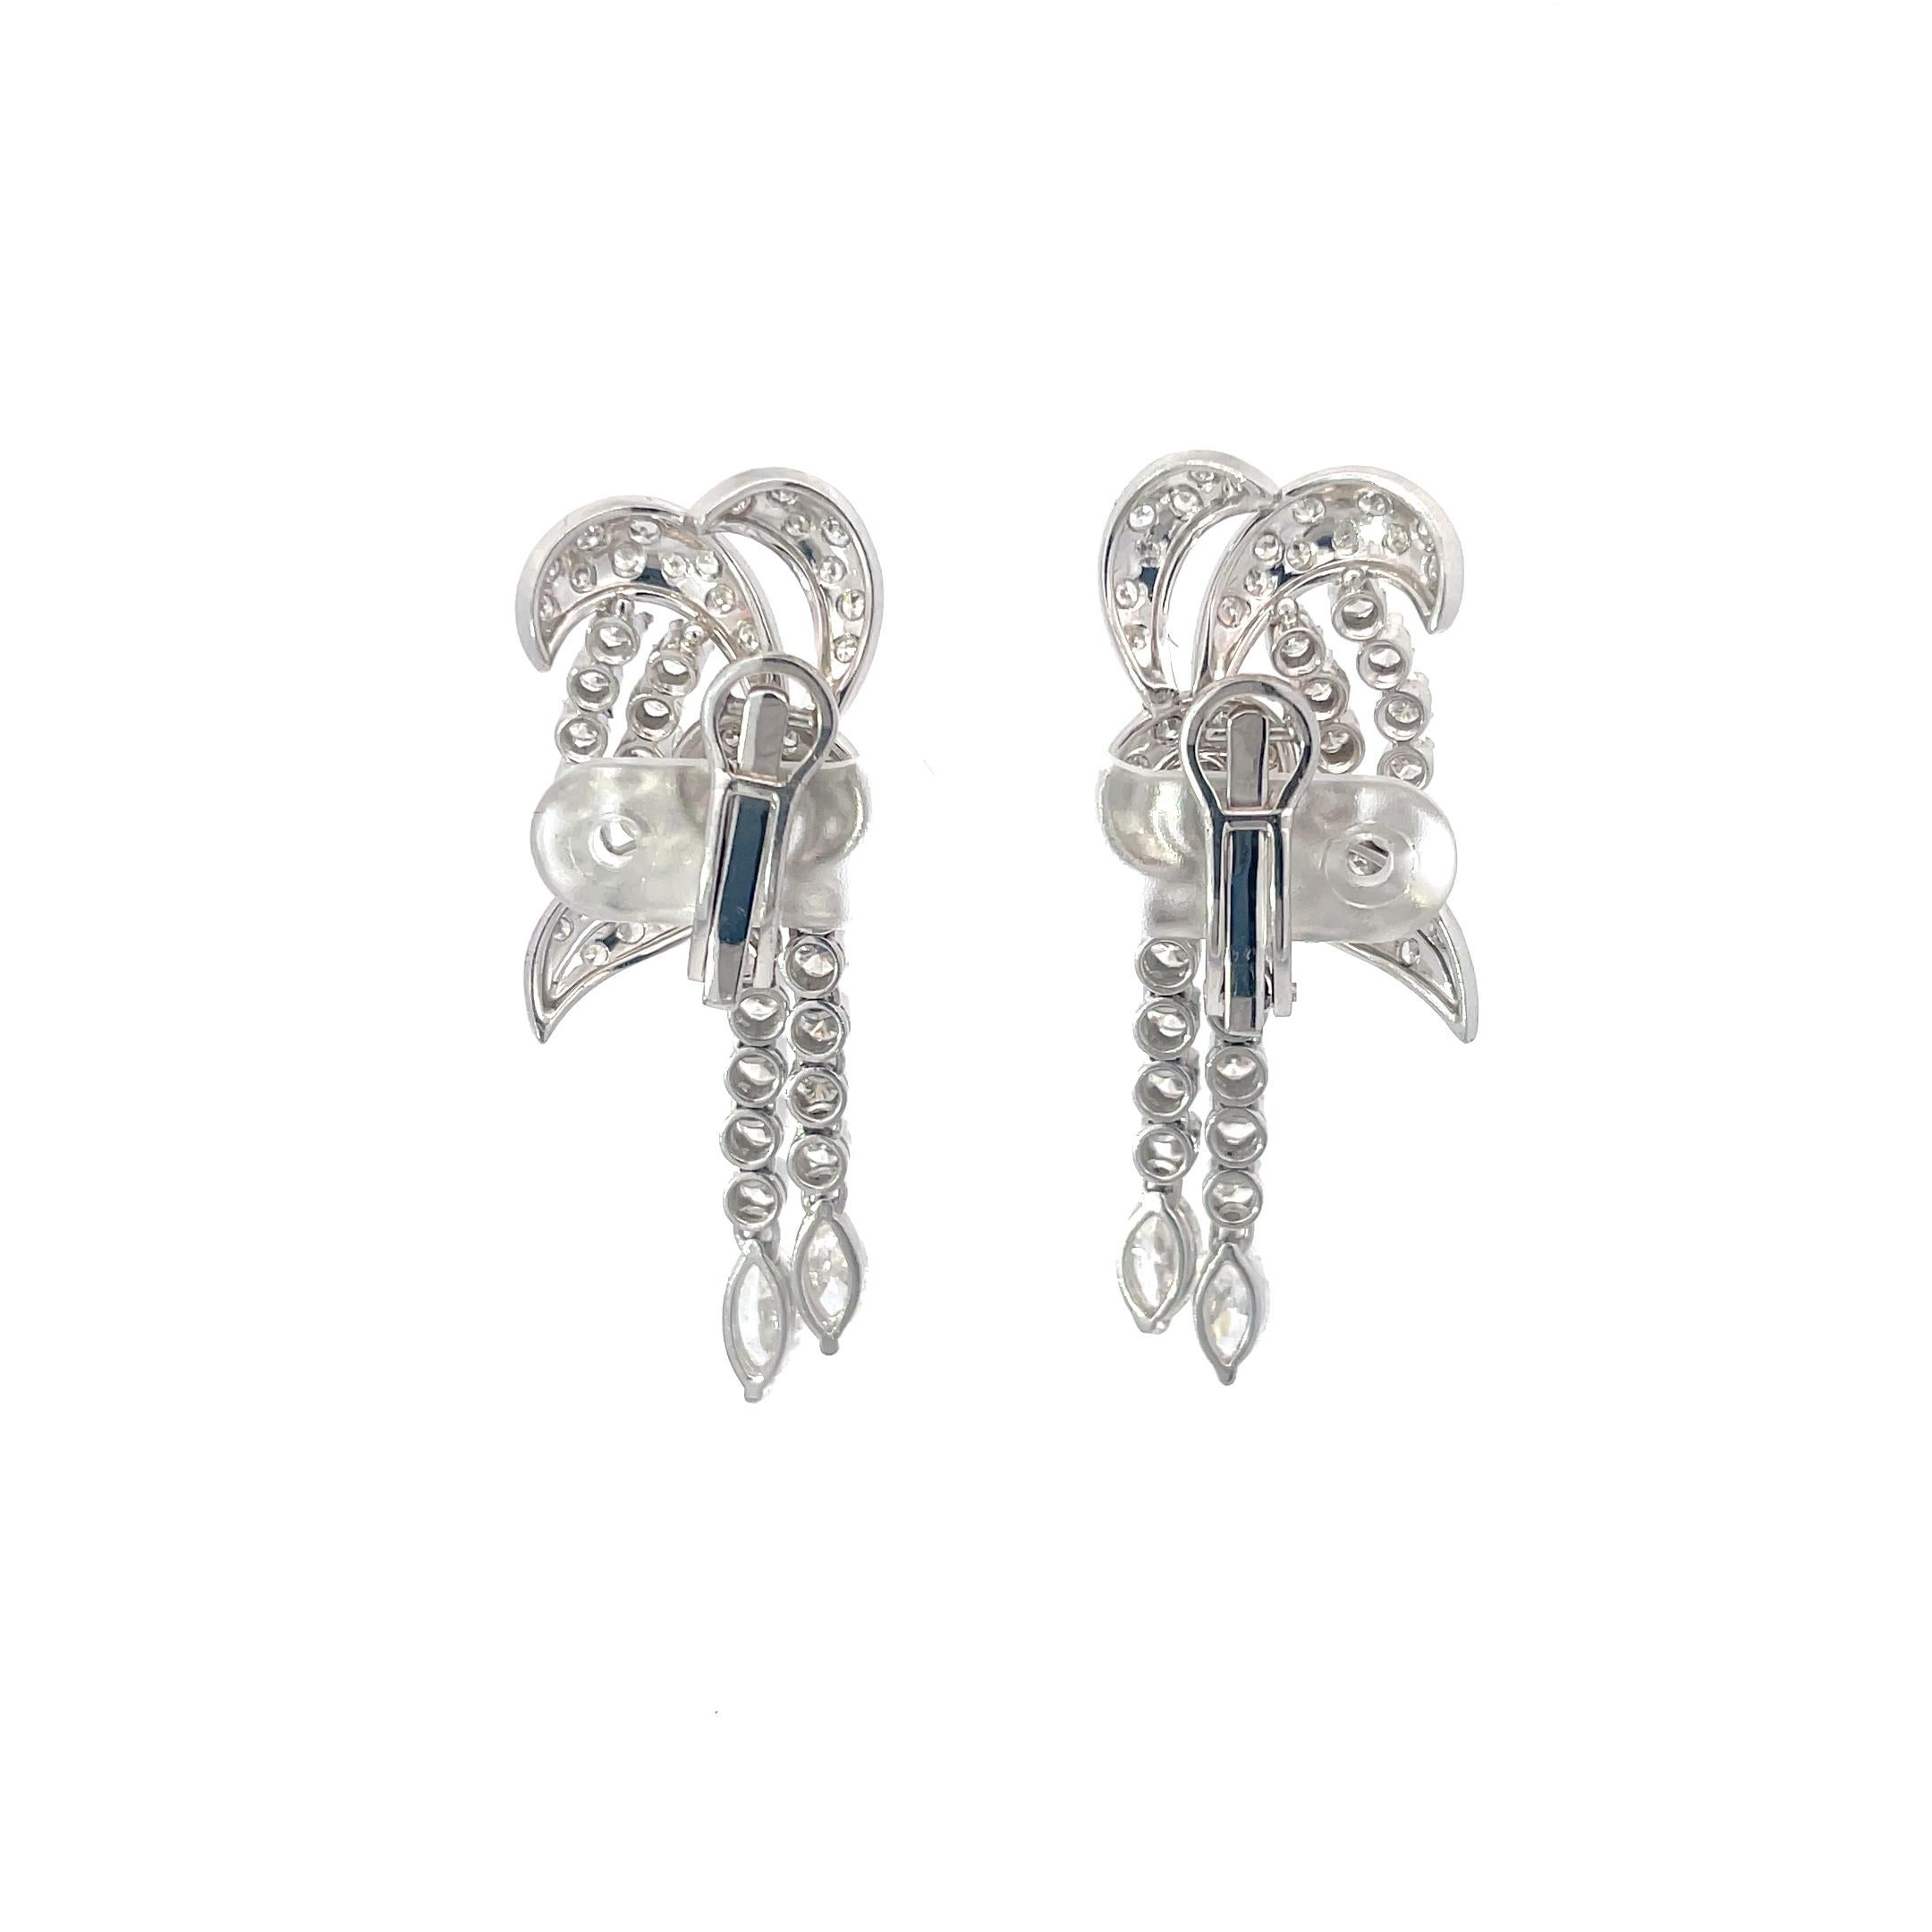 Swirl 6.25ctw Diamond Earrings in Platinum. The earrings feature 6.25ctw of round and marquise cut diamonds. 
2